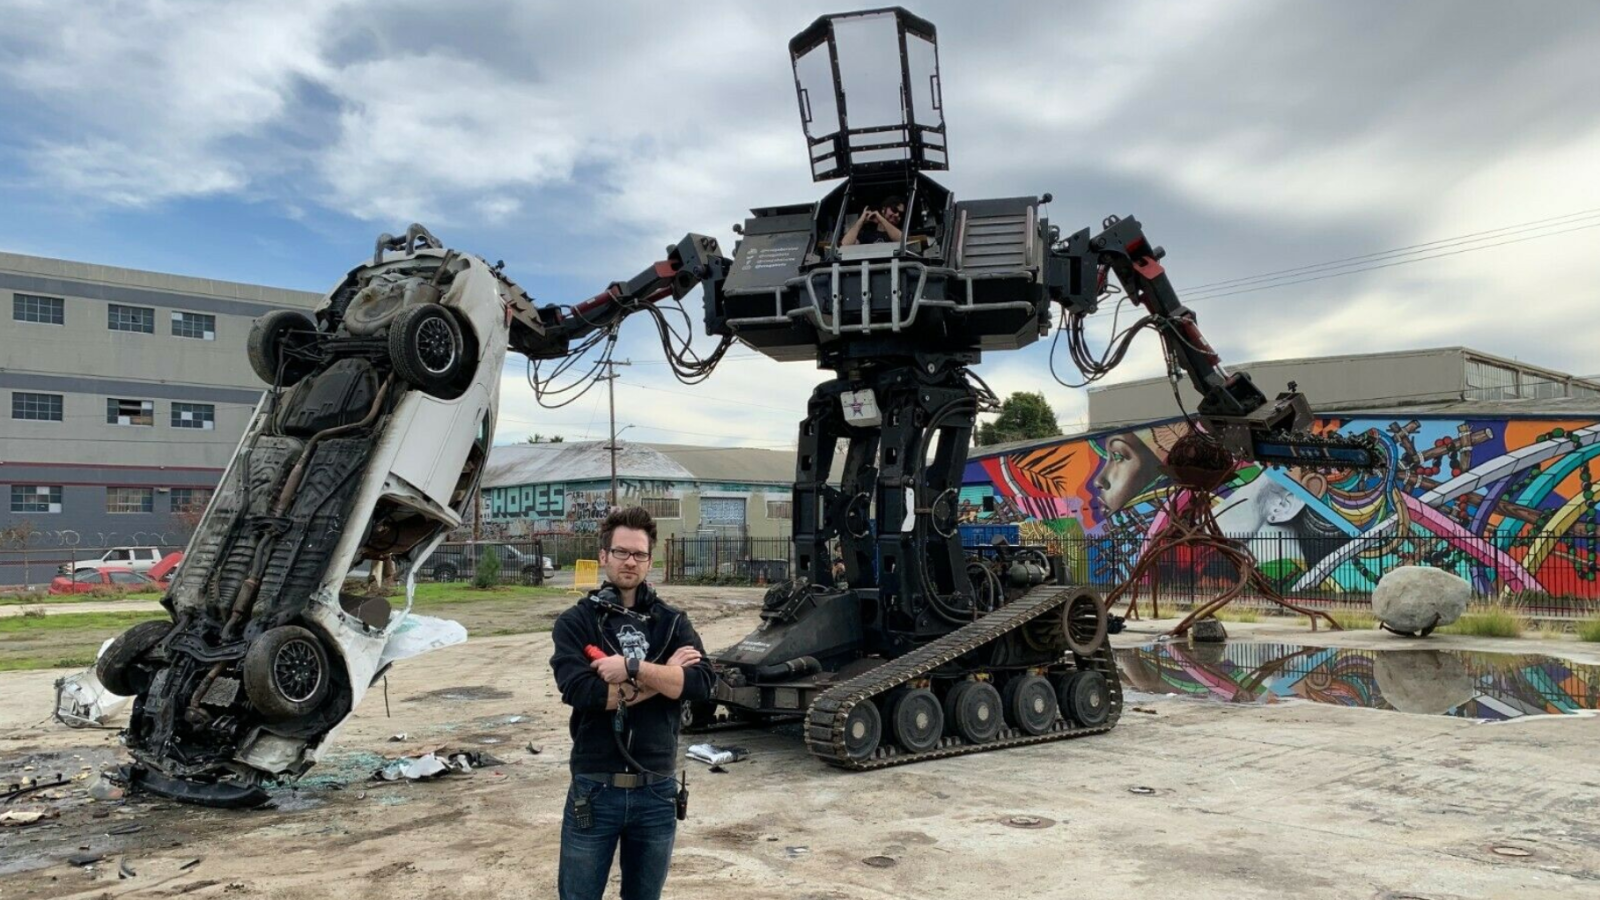 Entertainment Megabots Throws in the Towel and Puts Battle Robots on Ebay